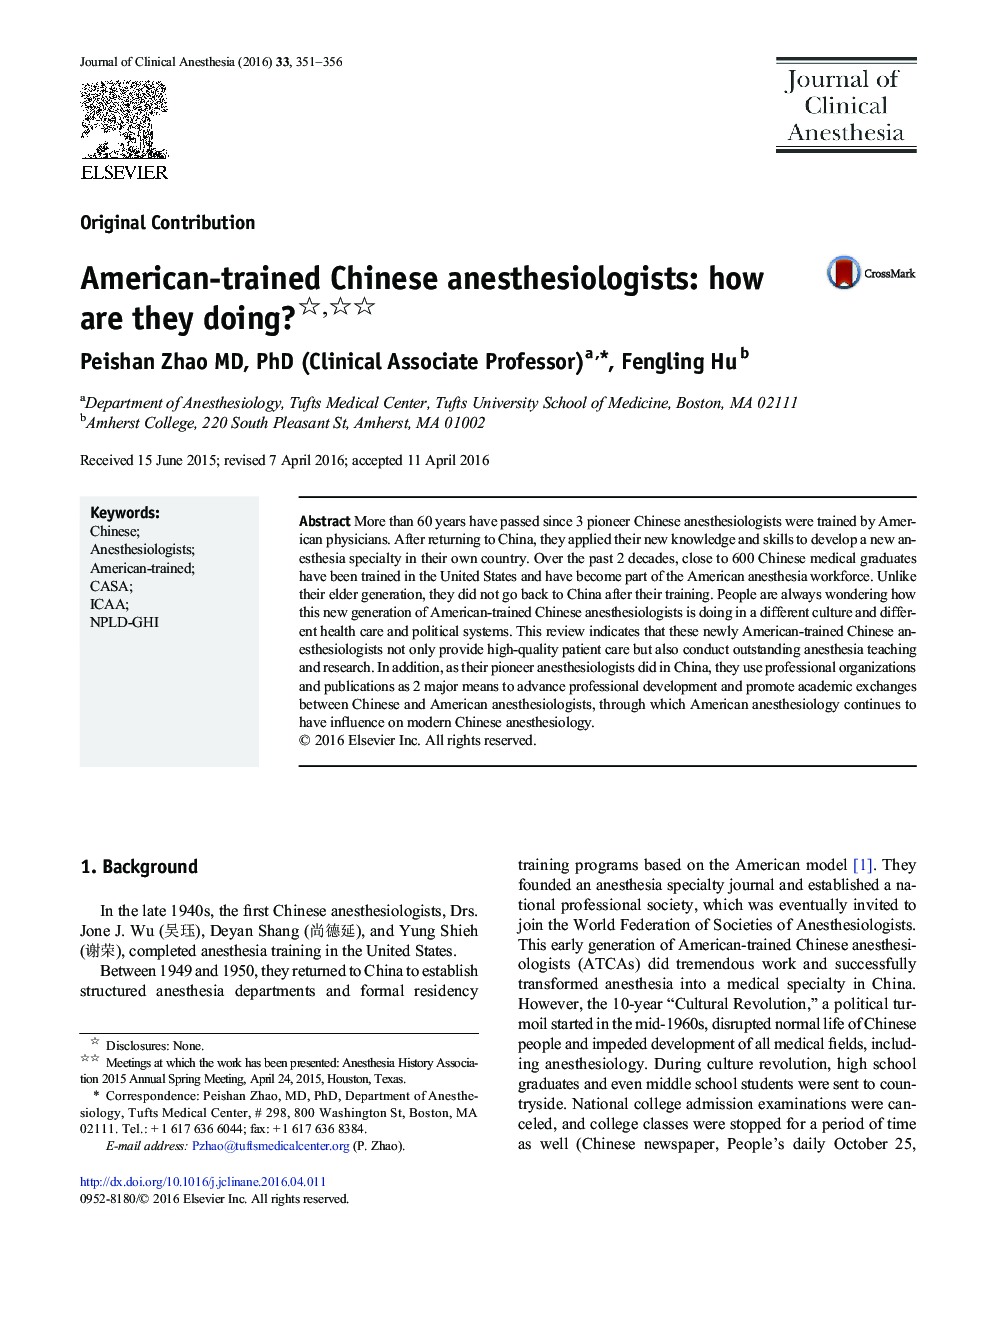 American-trained Chinese anesthesiologists: how are they doing?